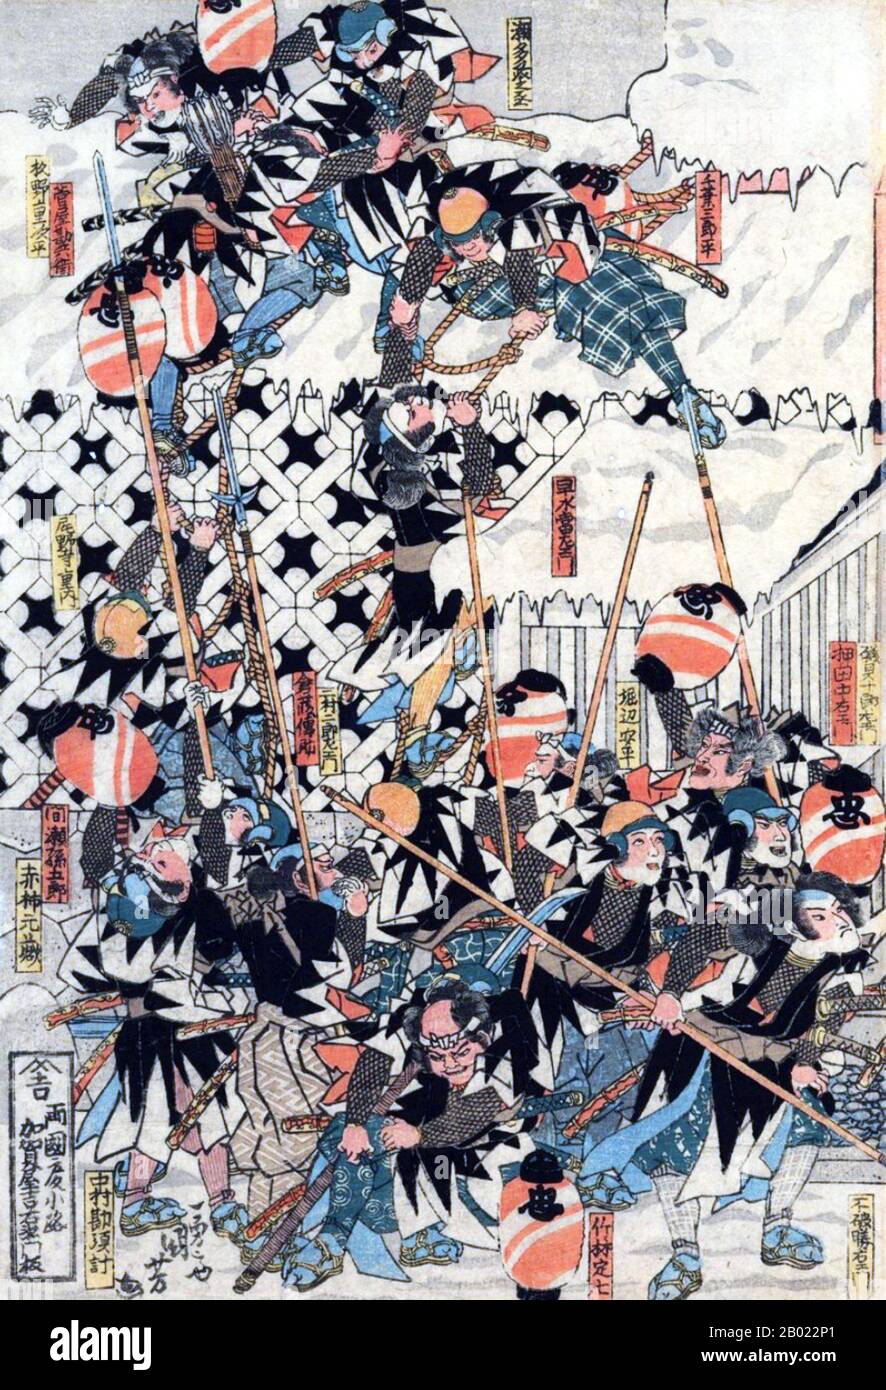 The revenge of the Forty-seven Ronin (四十七士 Shi-jū-shichi-shi), also known as the Forty-seven Samurai, the Akō vendetta, or the Genroku Akō incident (元禄赤穂事件 Genroku akō jiken) took place in Japan at the start of the 18th century. One noted Japanese scholar described the tale as the country's 'national legend'. It recounts the most famous case involving the samurai code of honor, bushidō.  The story tells of a group of samurai who were left leaderless (becoming ronin) after their daimyo (feudal lord) Asano Naganori was forced to commit seppuku (ritual suicide) for assaulting a court official nam Stock Photo